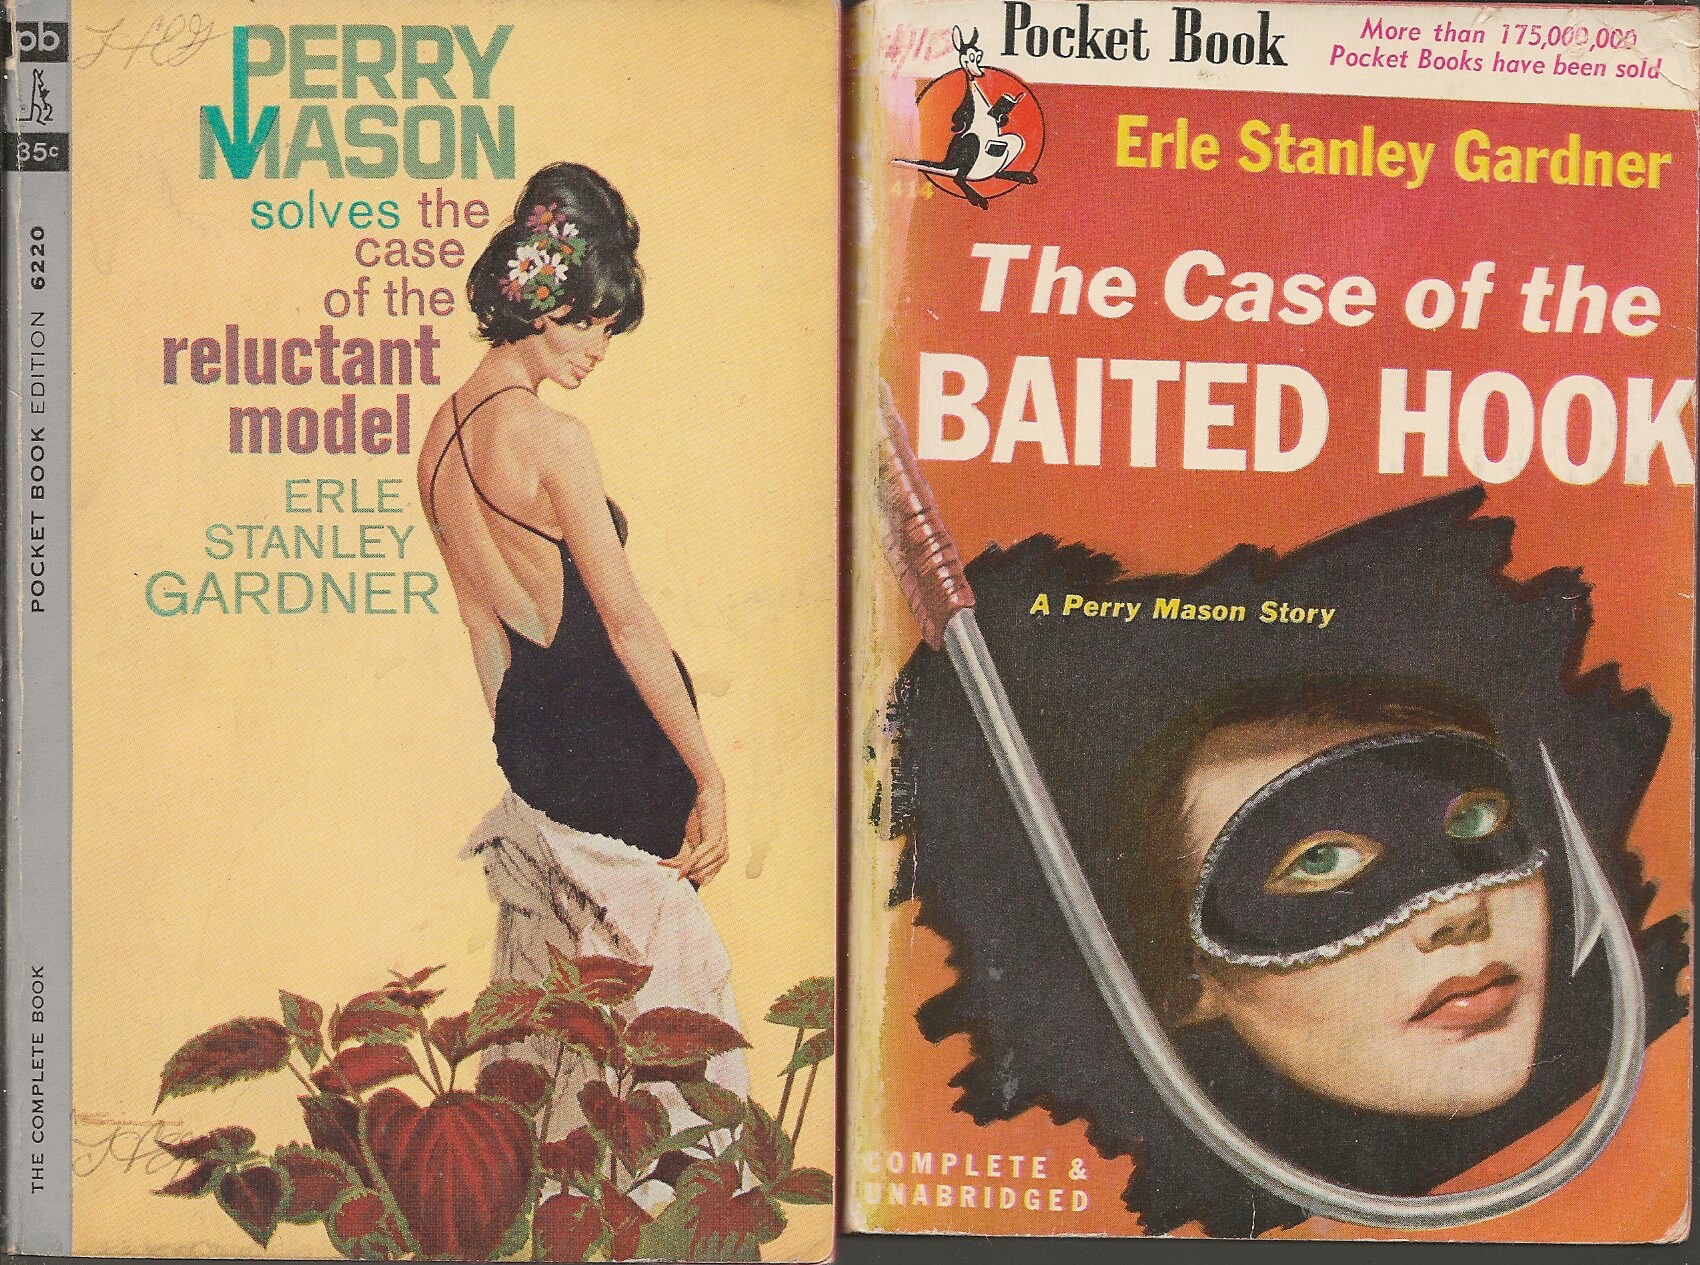 The Case of the Baited Hook: A Perry Mason Mystery (An American